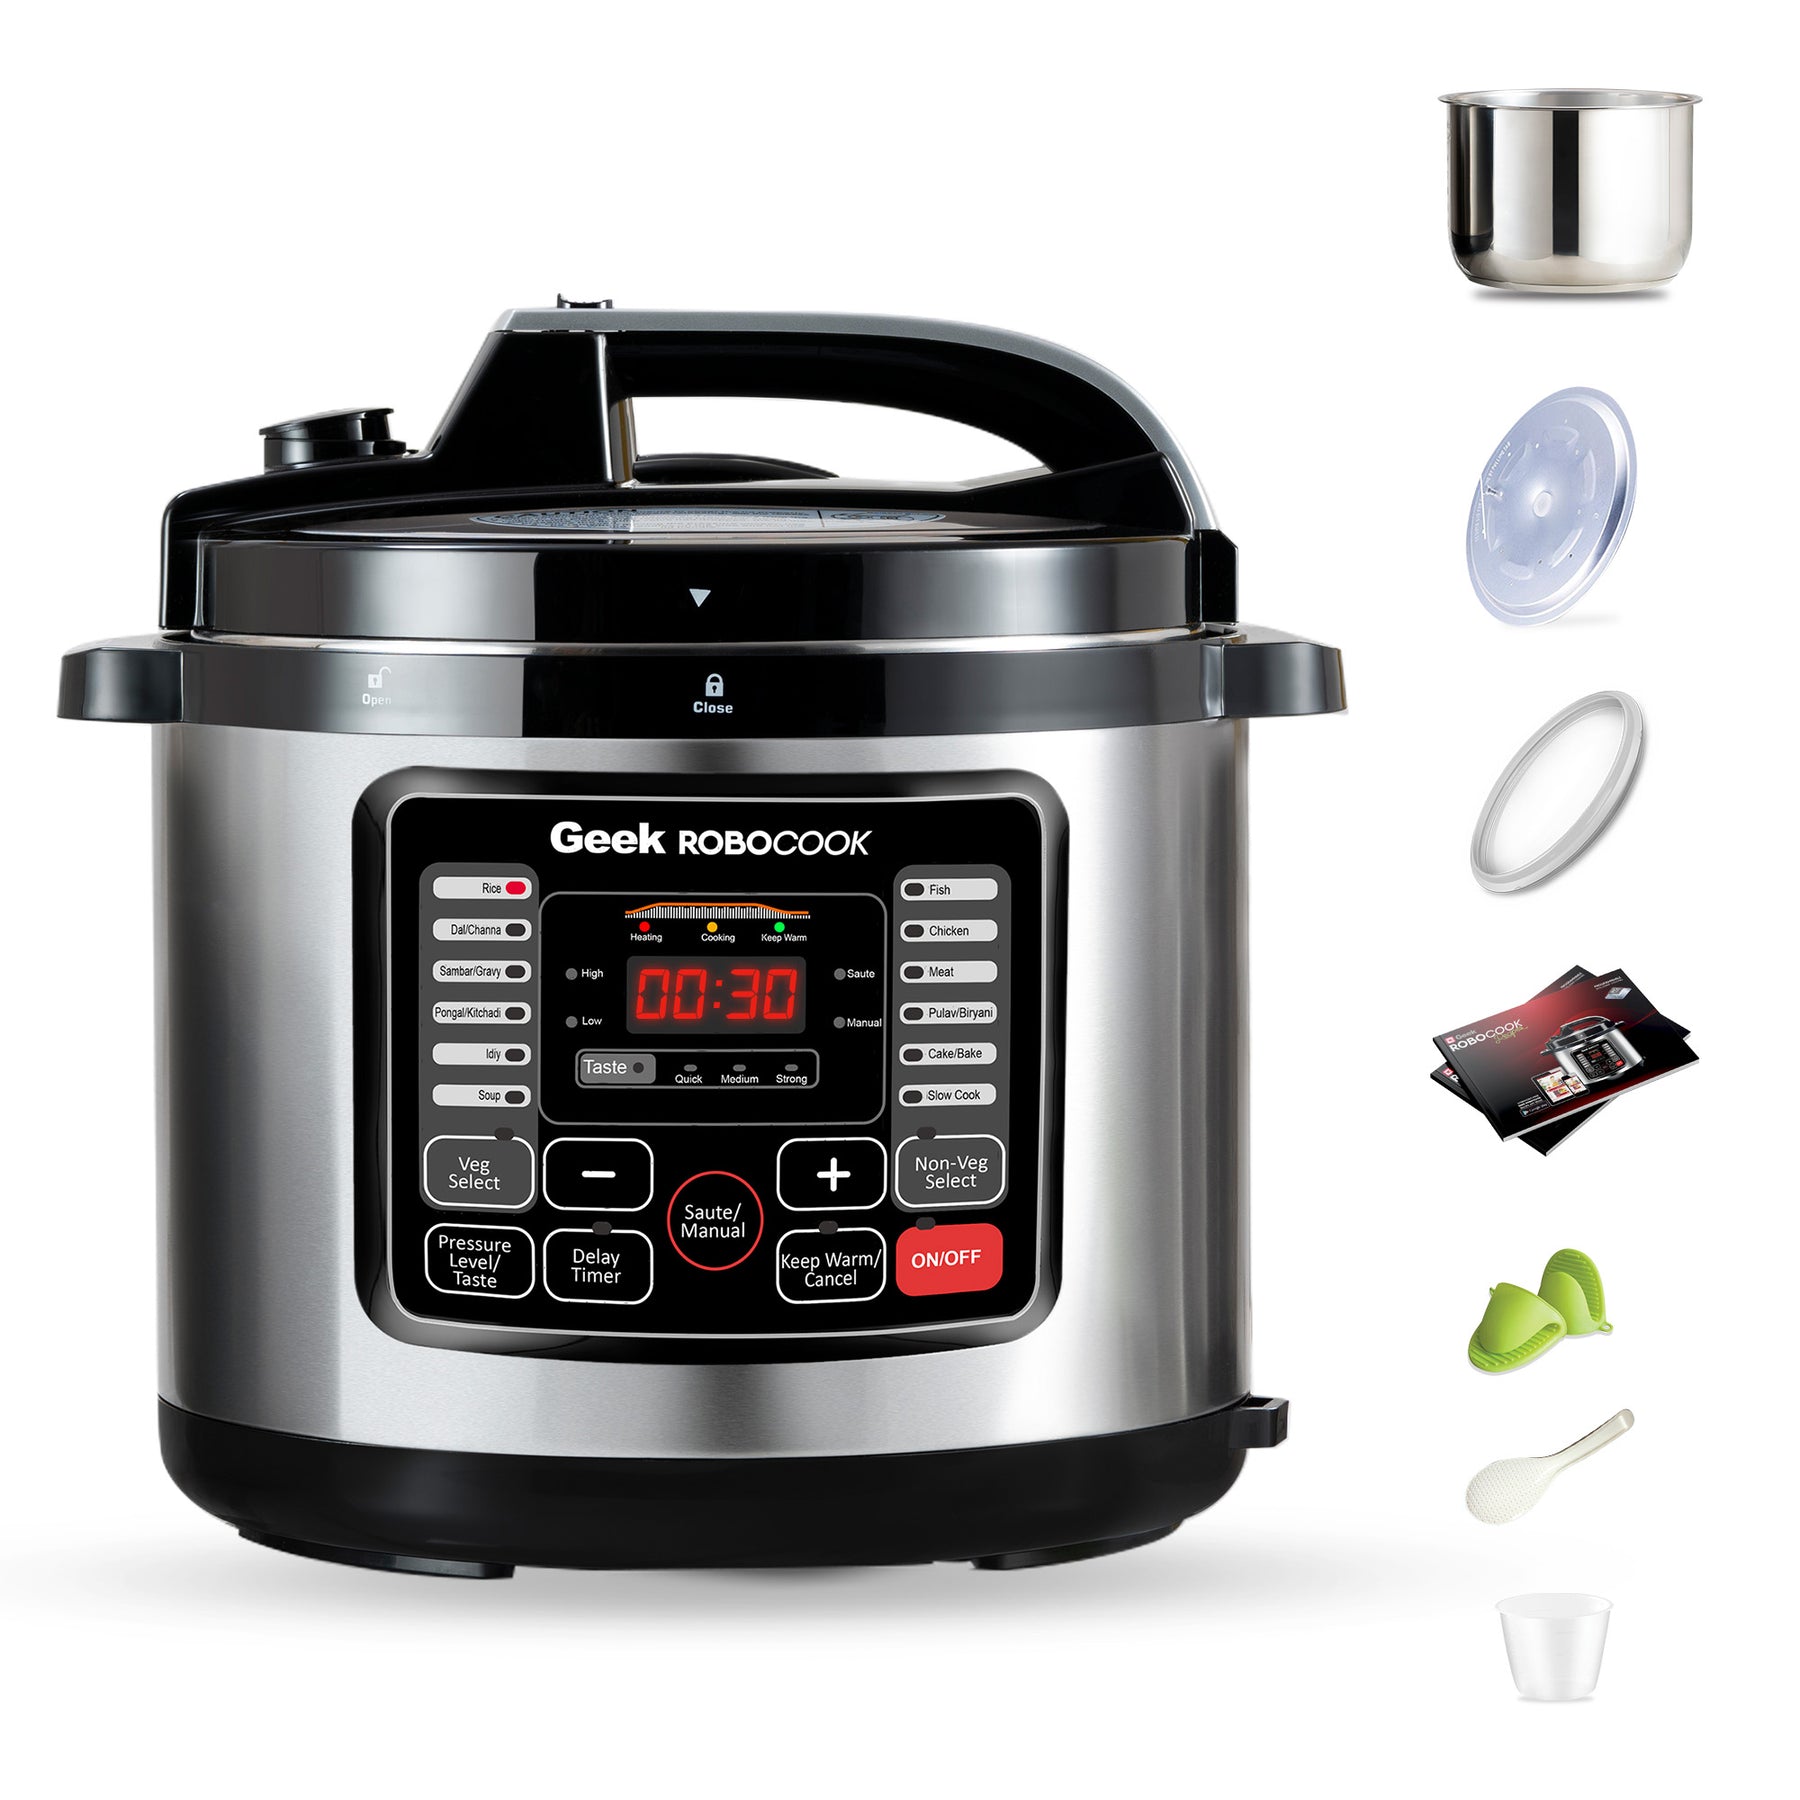 Geek Robocook Nuvo 8 Litre Electric Pressure Cooker with Stainless Steel Pot